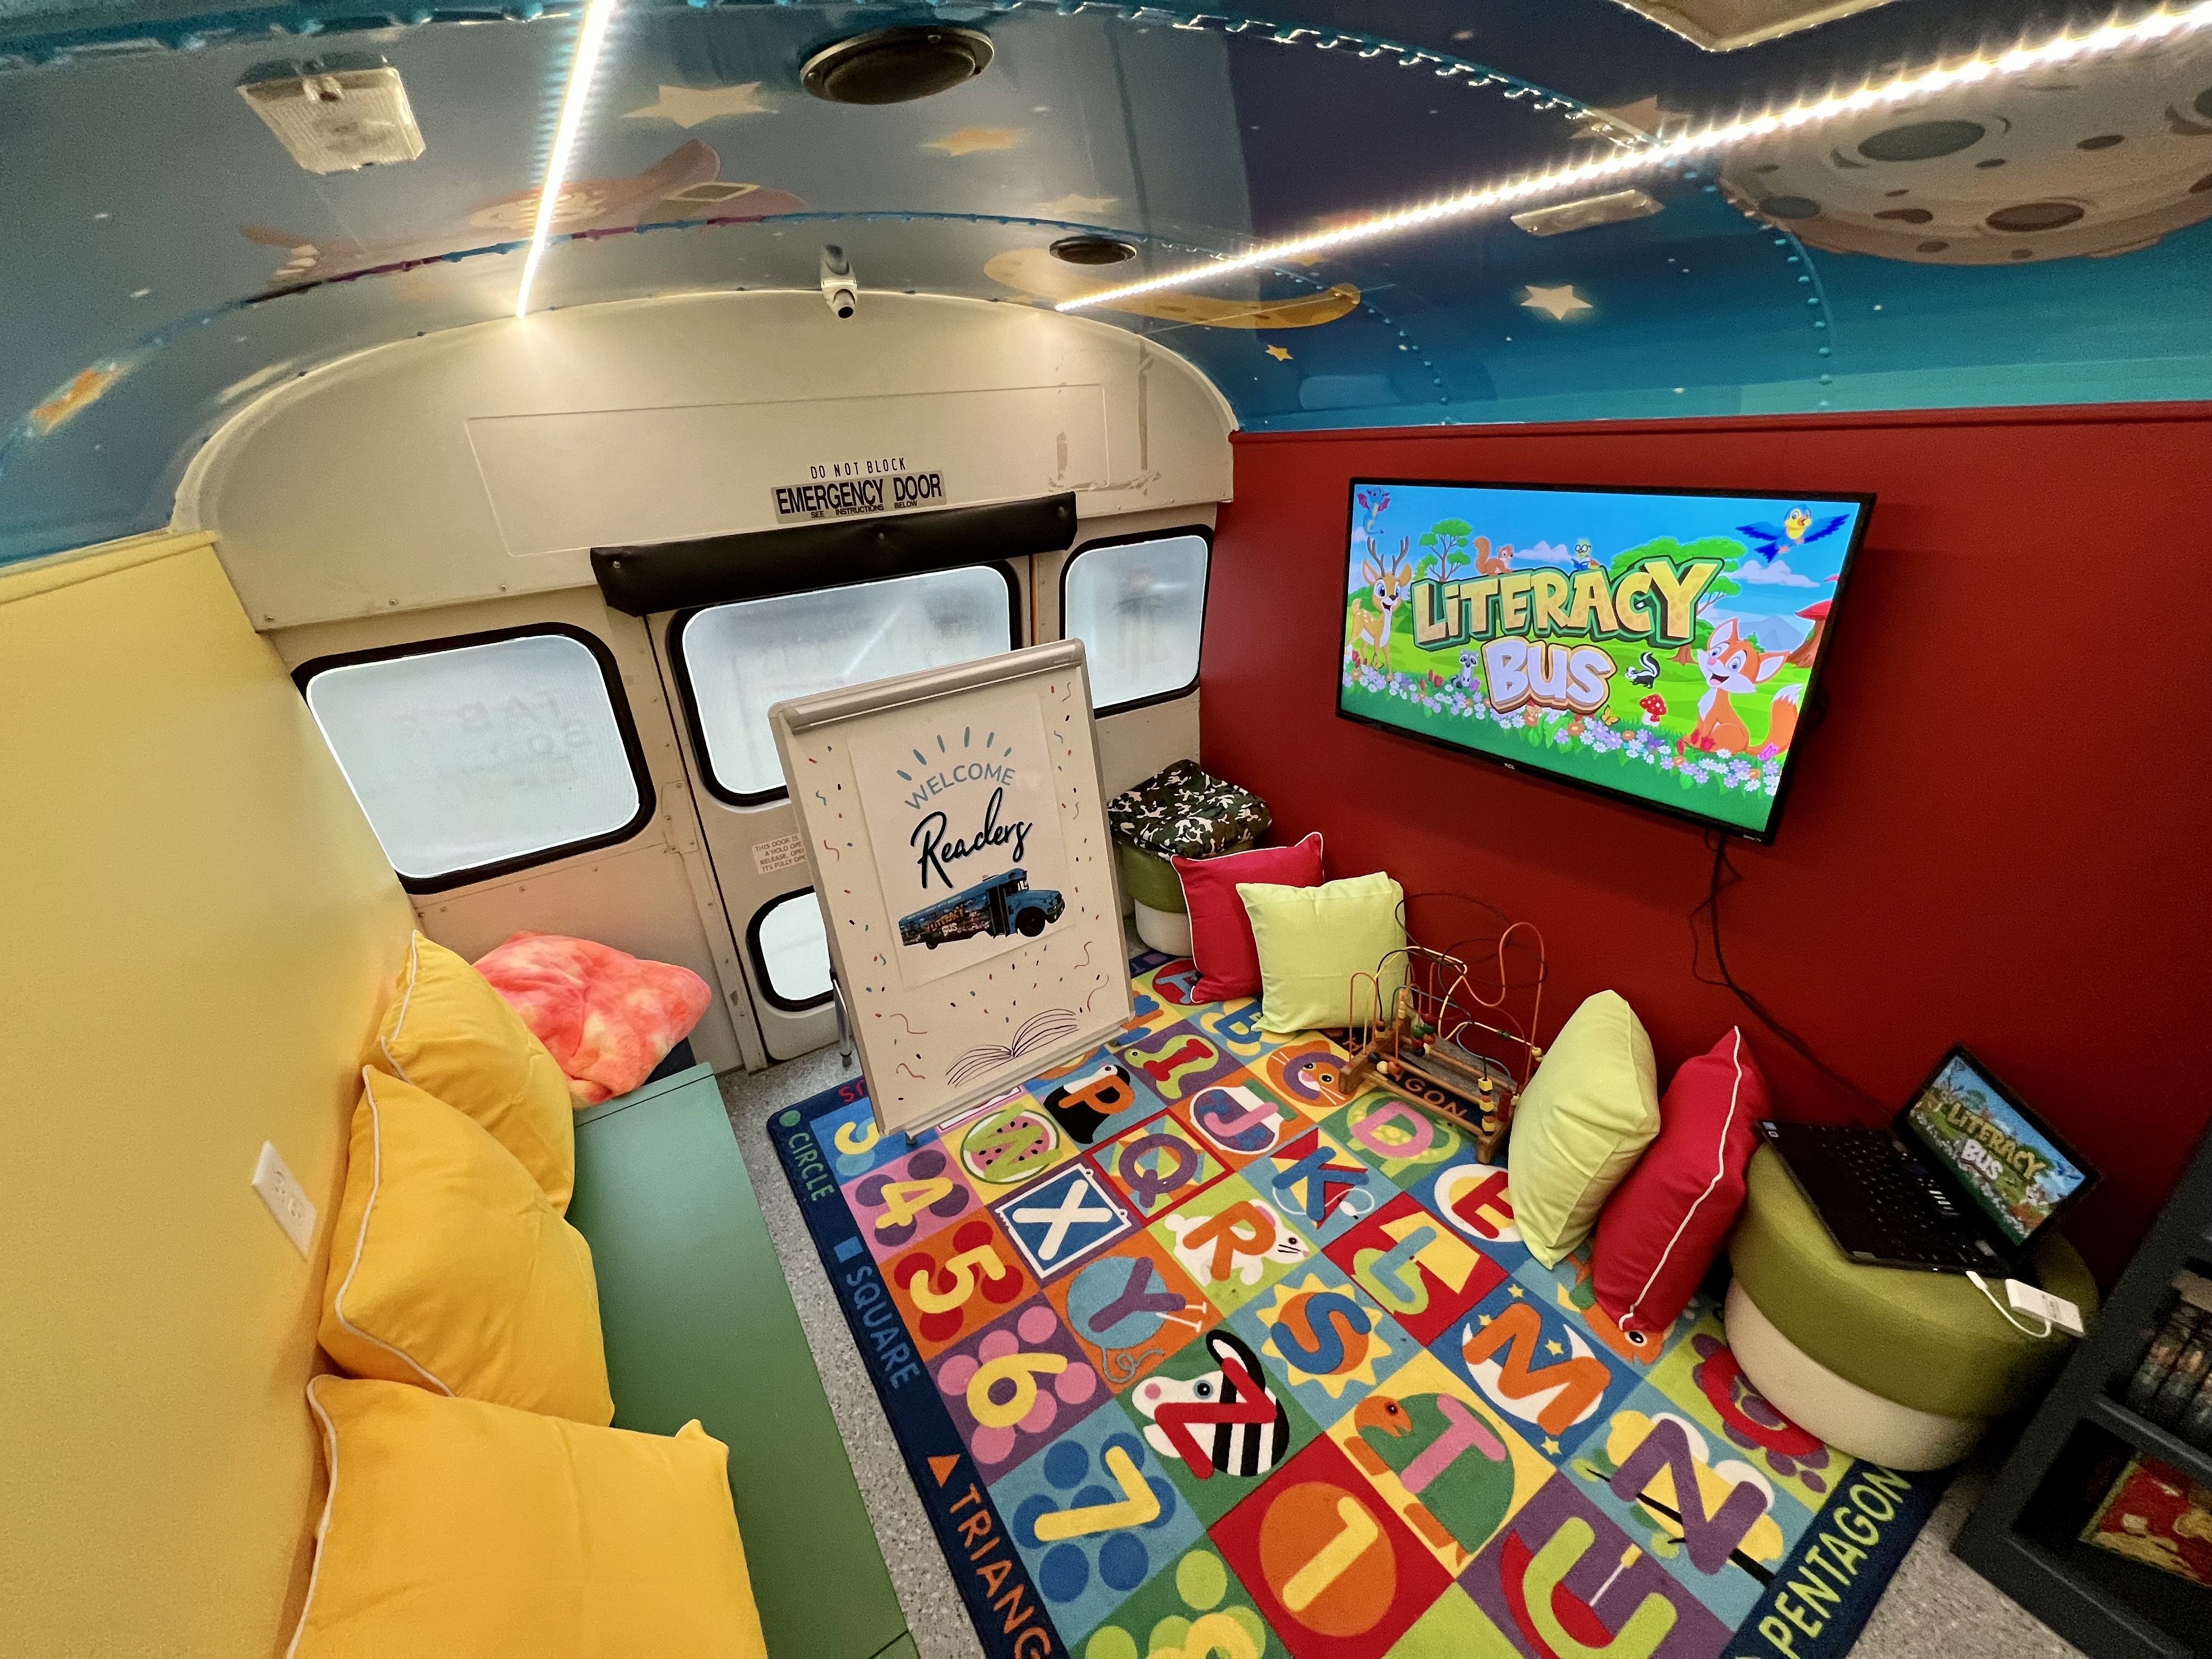 inside of school bus painted in bright colors on roof. All seats have been removed and bookshelves lined with books are along the walls. Chairs, cushions, stuffed animals are also inside